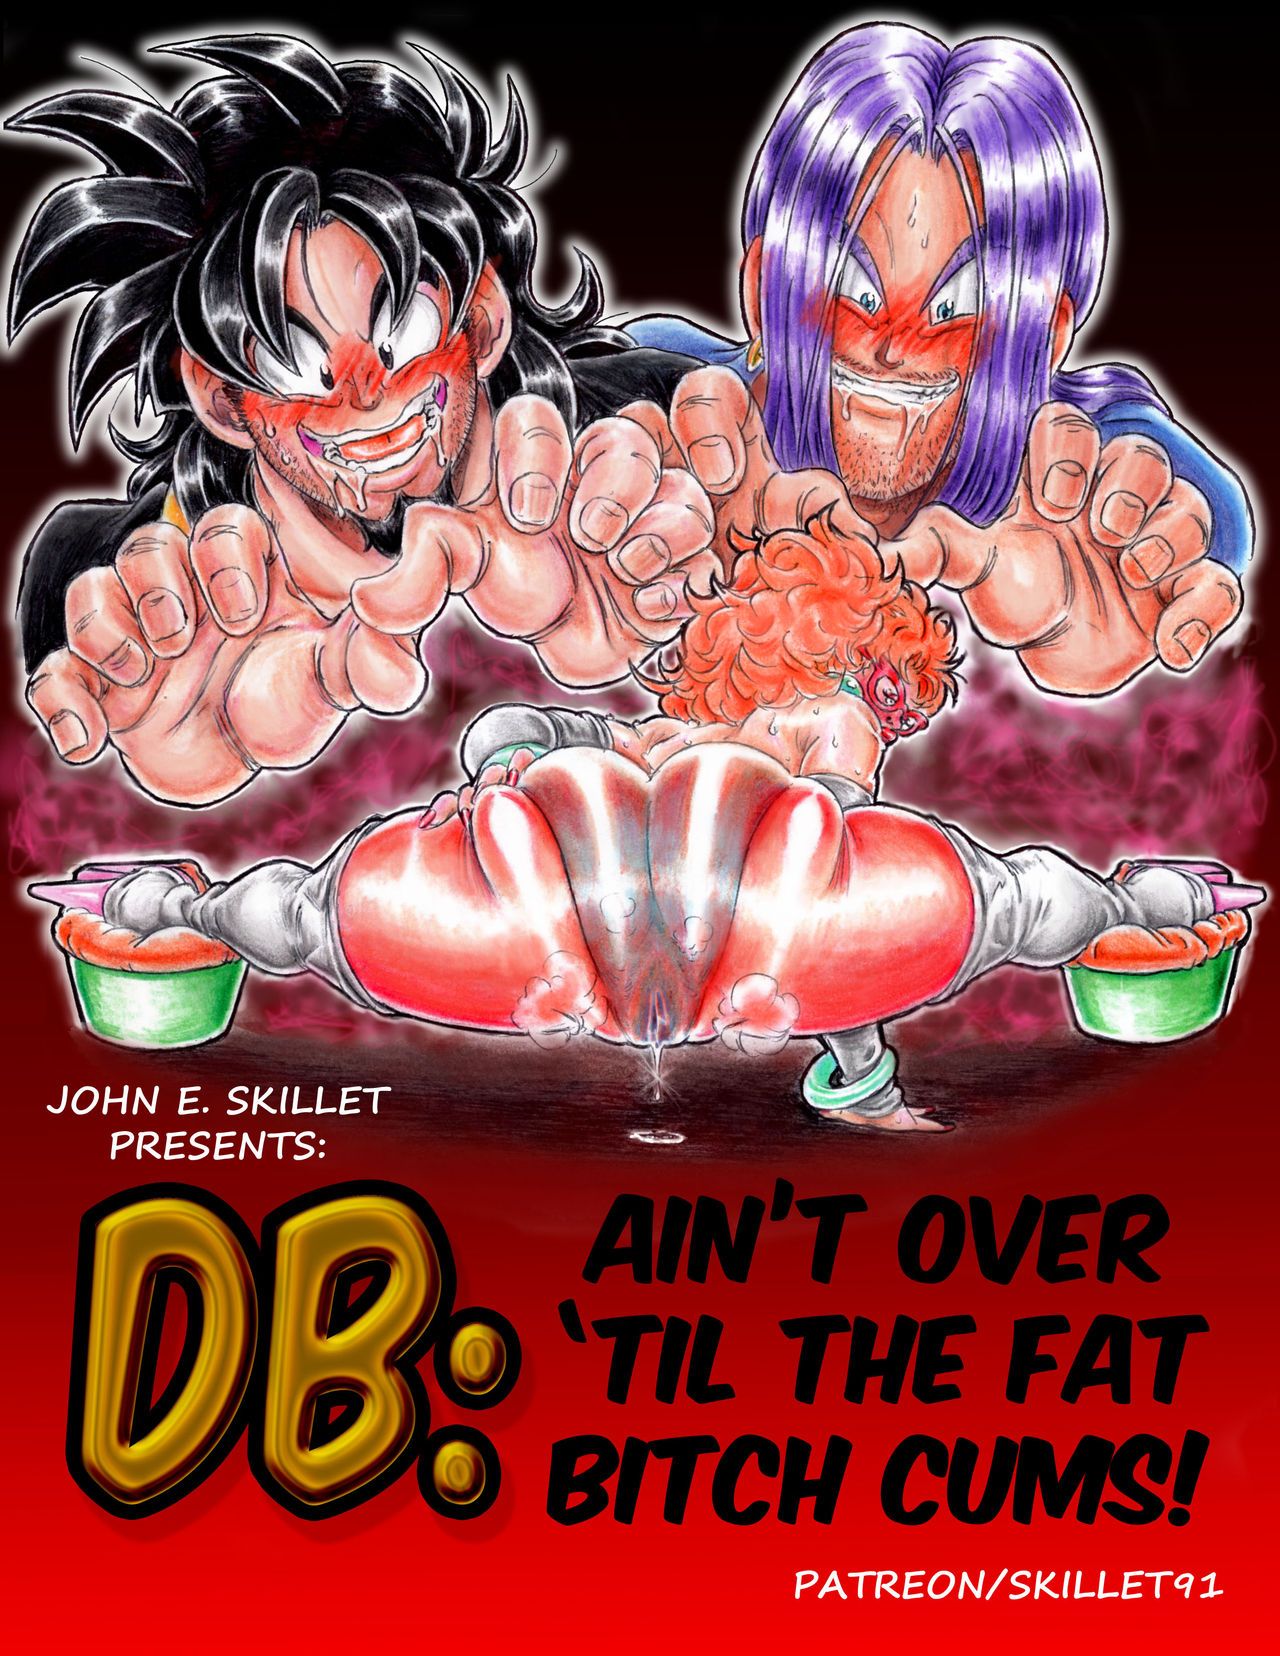 [Skillet91] Ain't over 'til the fat bitch cums! (Dragon Ball Z) [Ongoing] 1